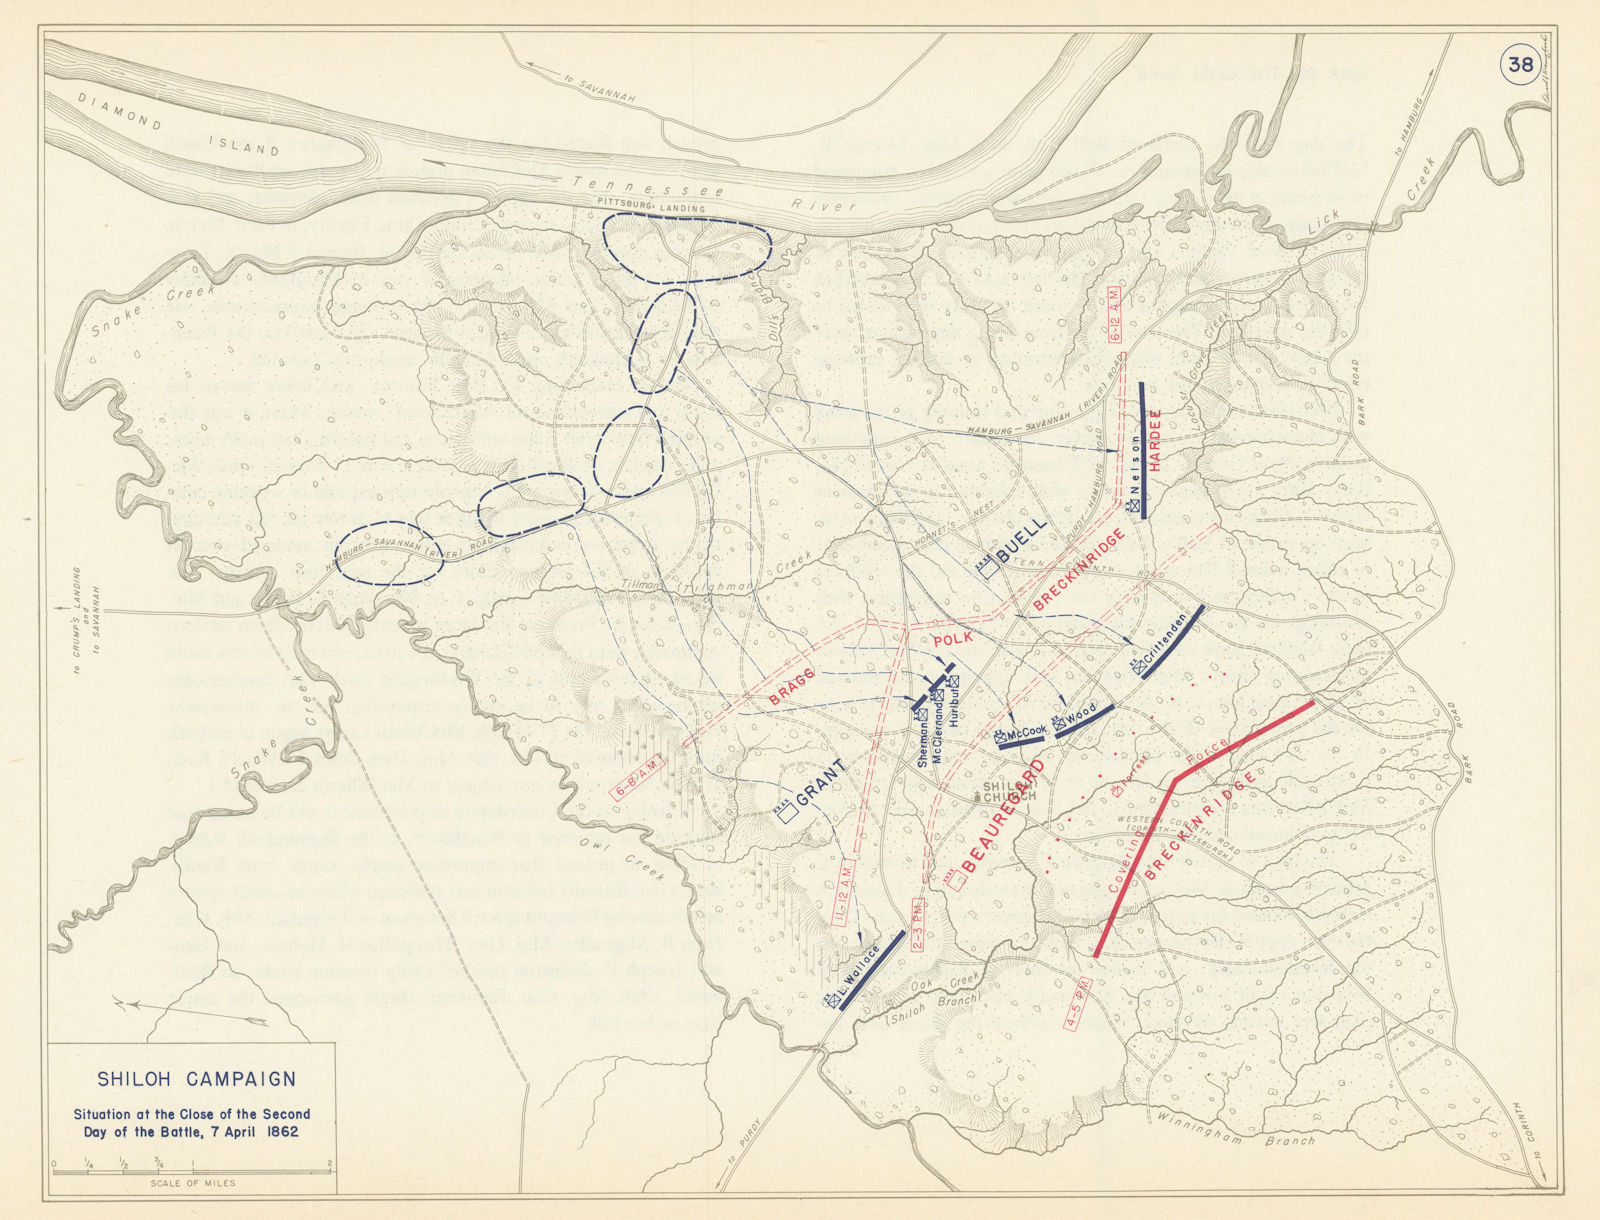 American Civil War. Evening 7 April 1862. Battle of Shiloh. Tennessee 1959 map